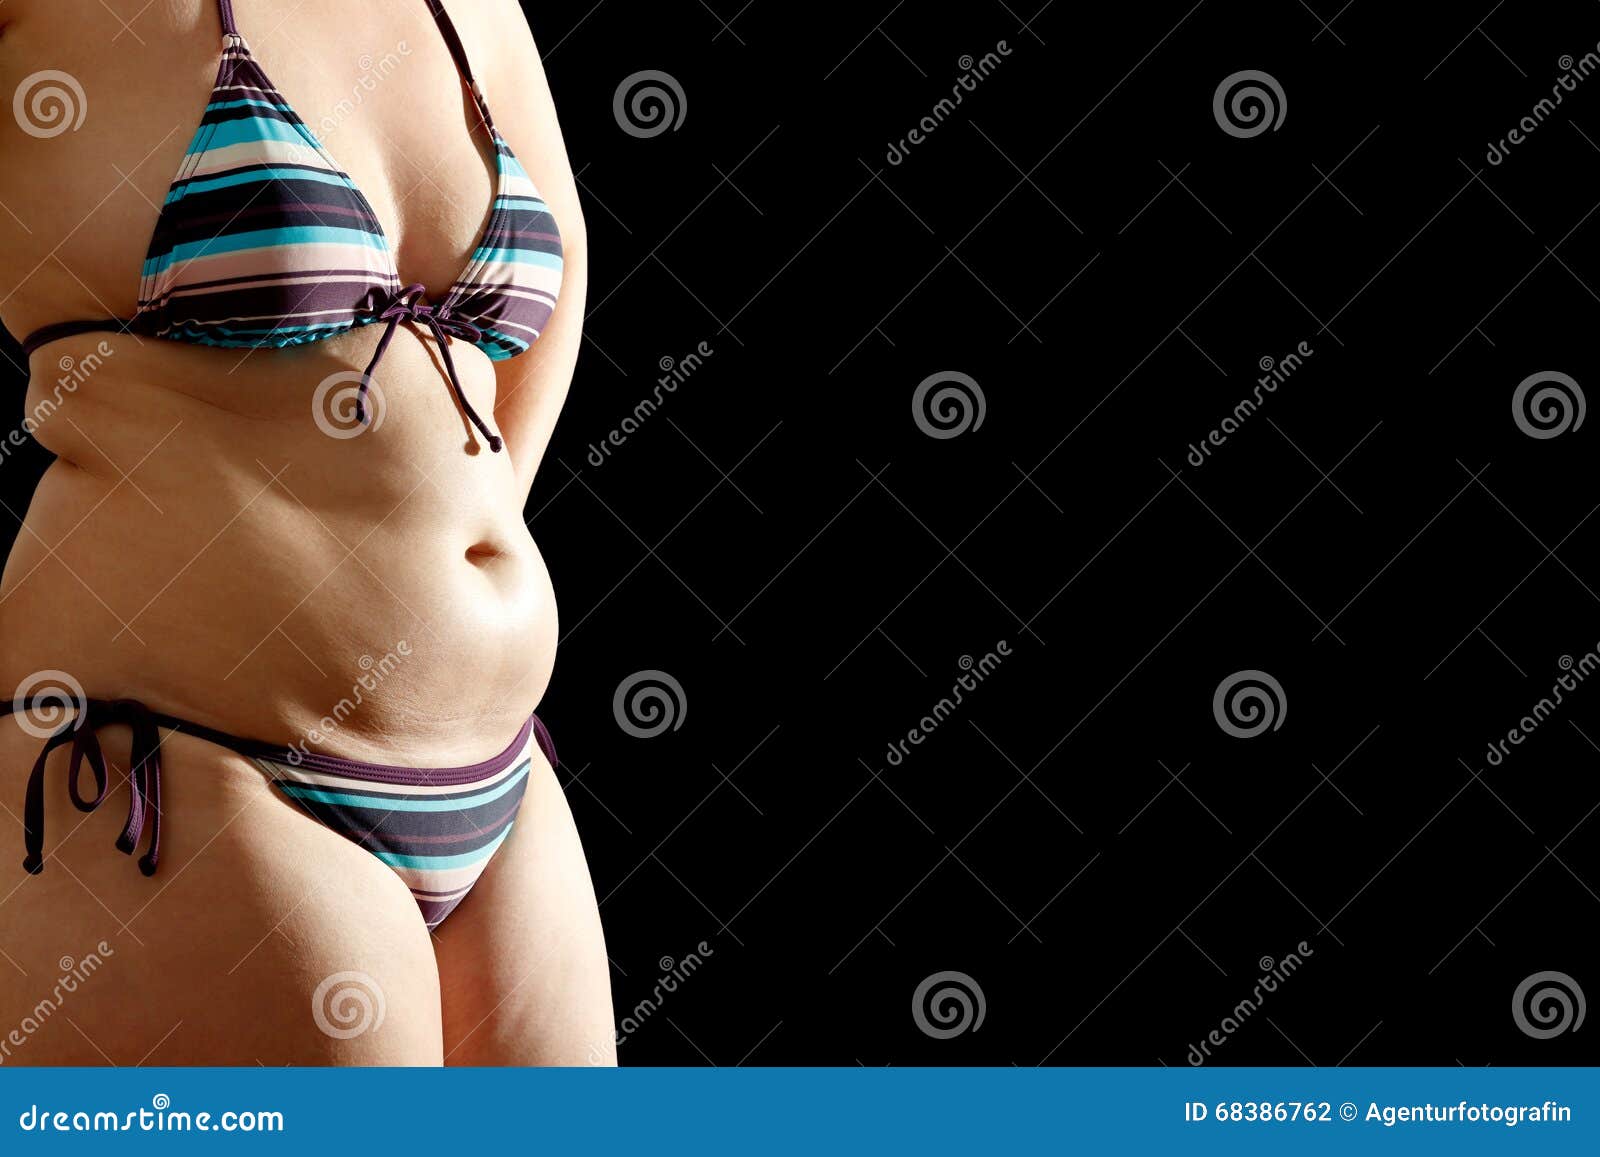 fat female body with back copy space